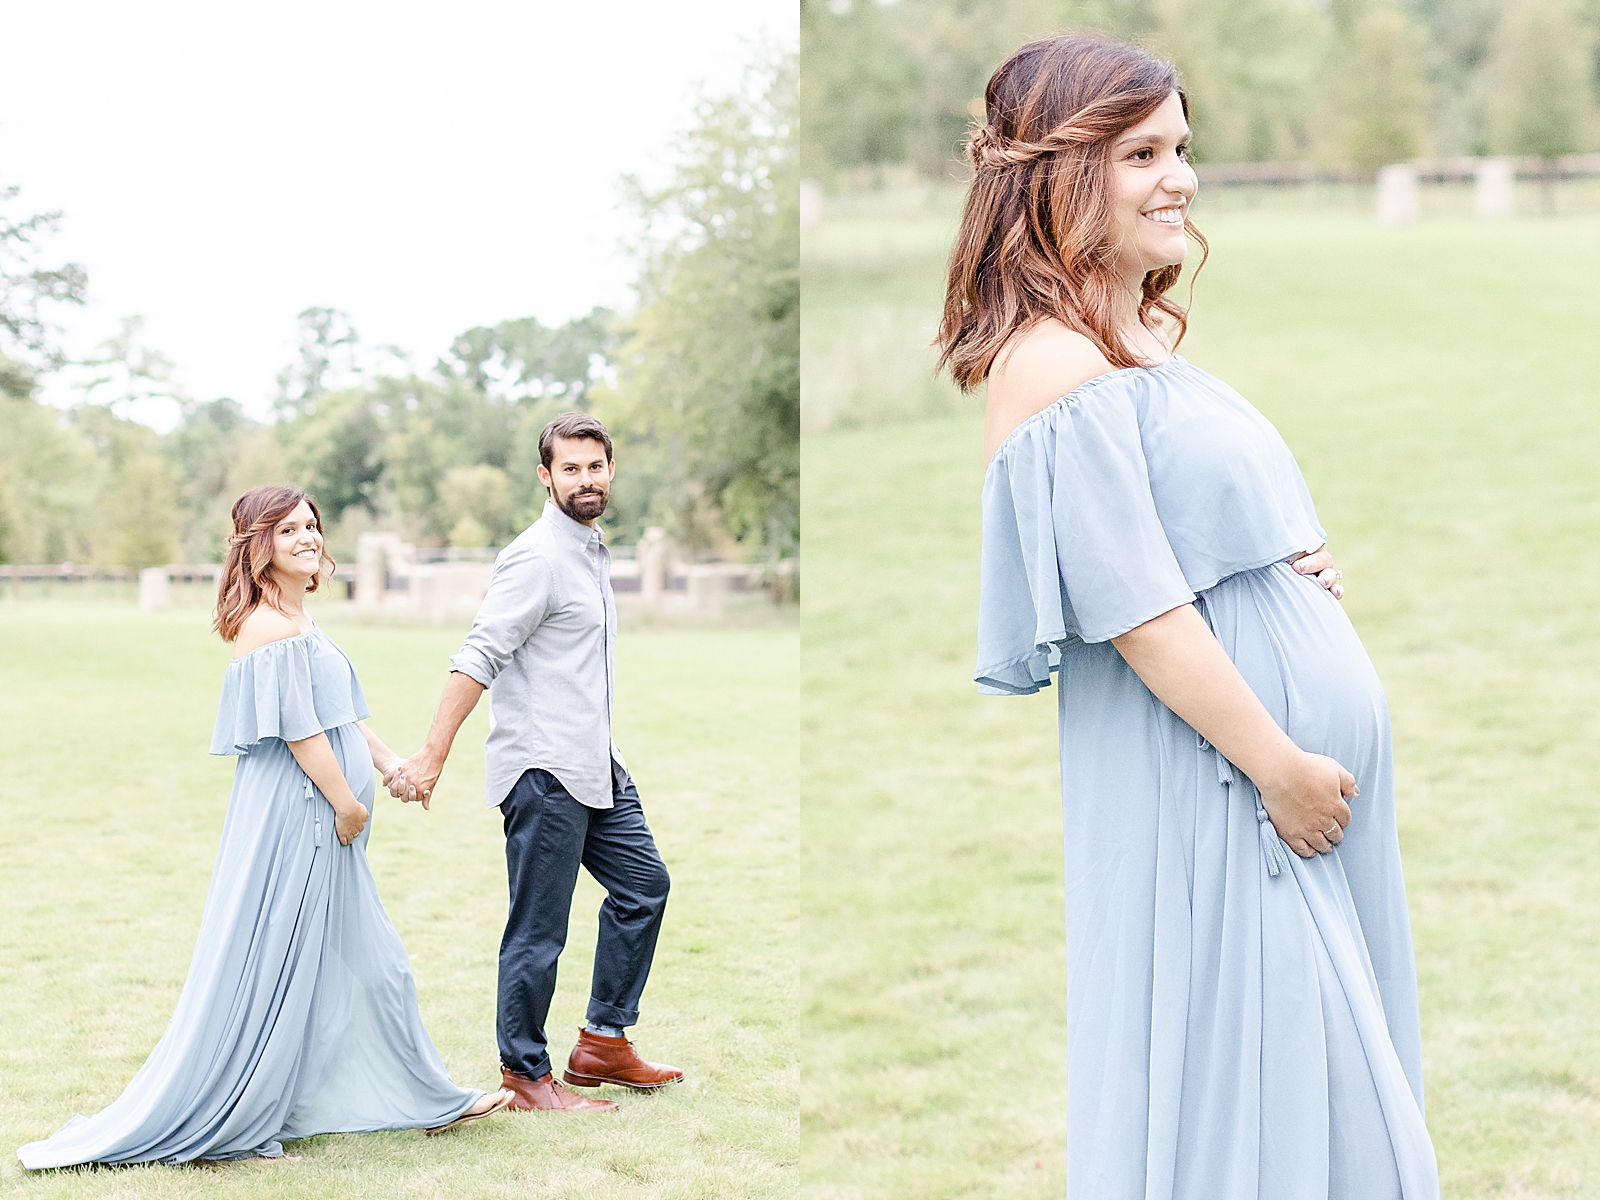 husband leading his pregnant wife across the grass while smiling at the camera and close up shot of pregnant mom holding her baby bump wearing a blue gown during maternity photos